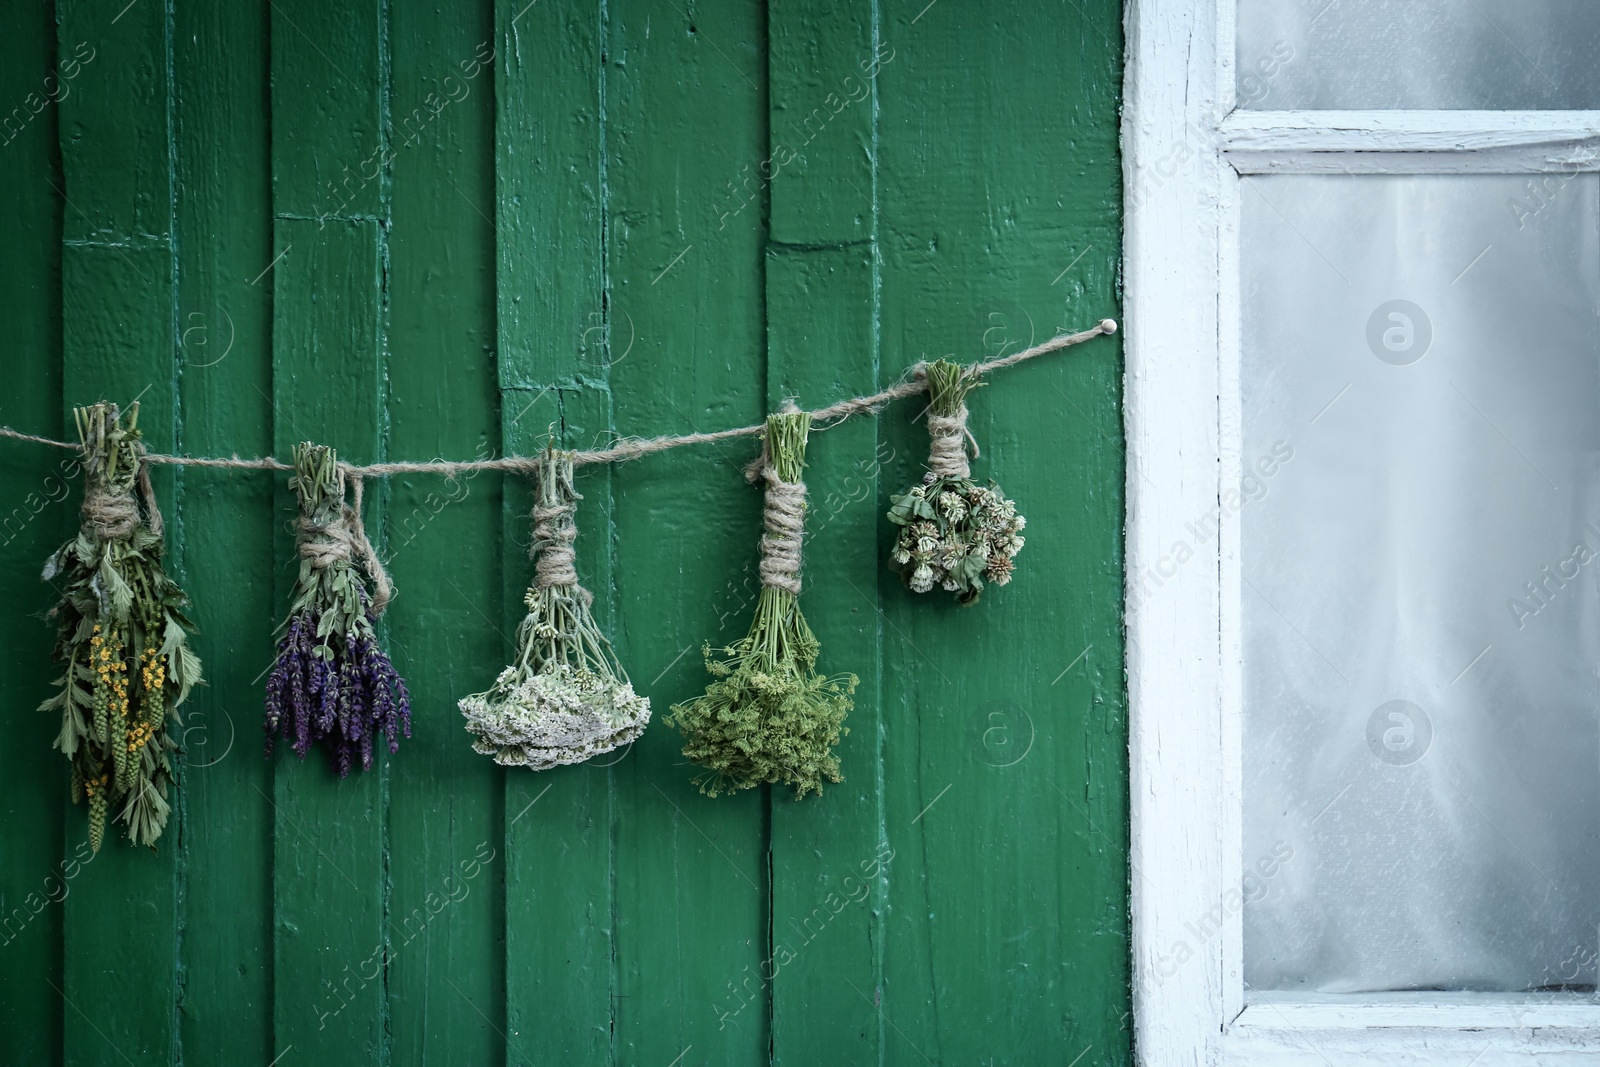 Photo of Bunches of different beautiful dried flowers hanging on rope near green wooden wall outdoors